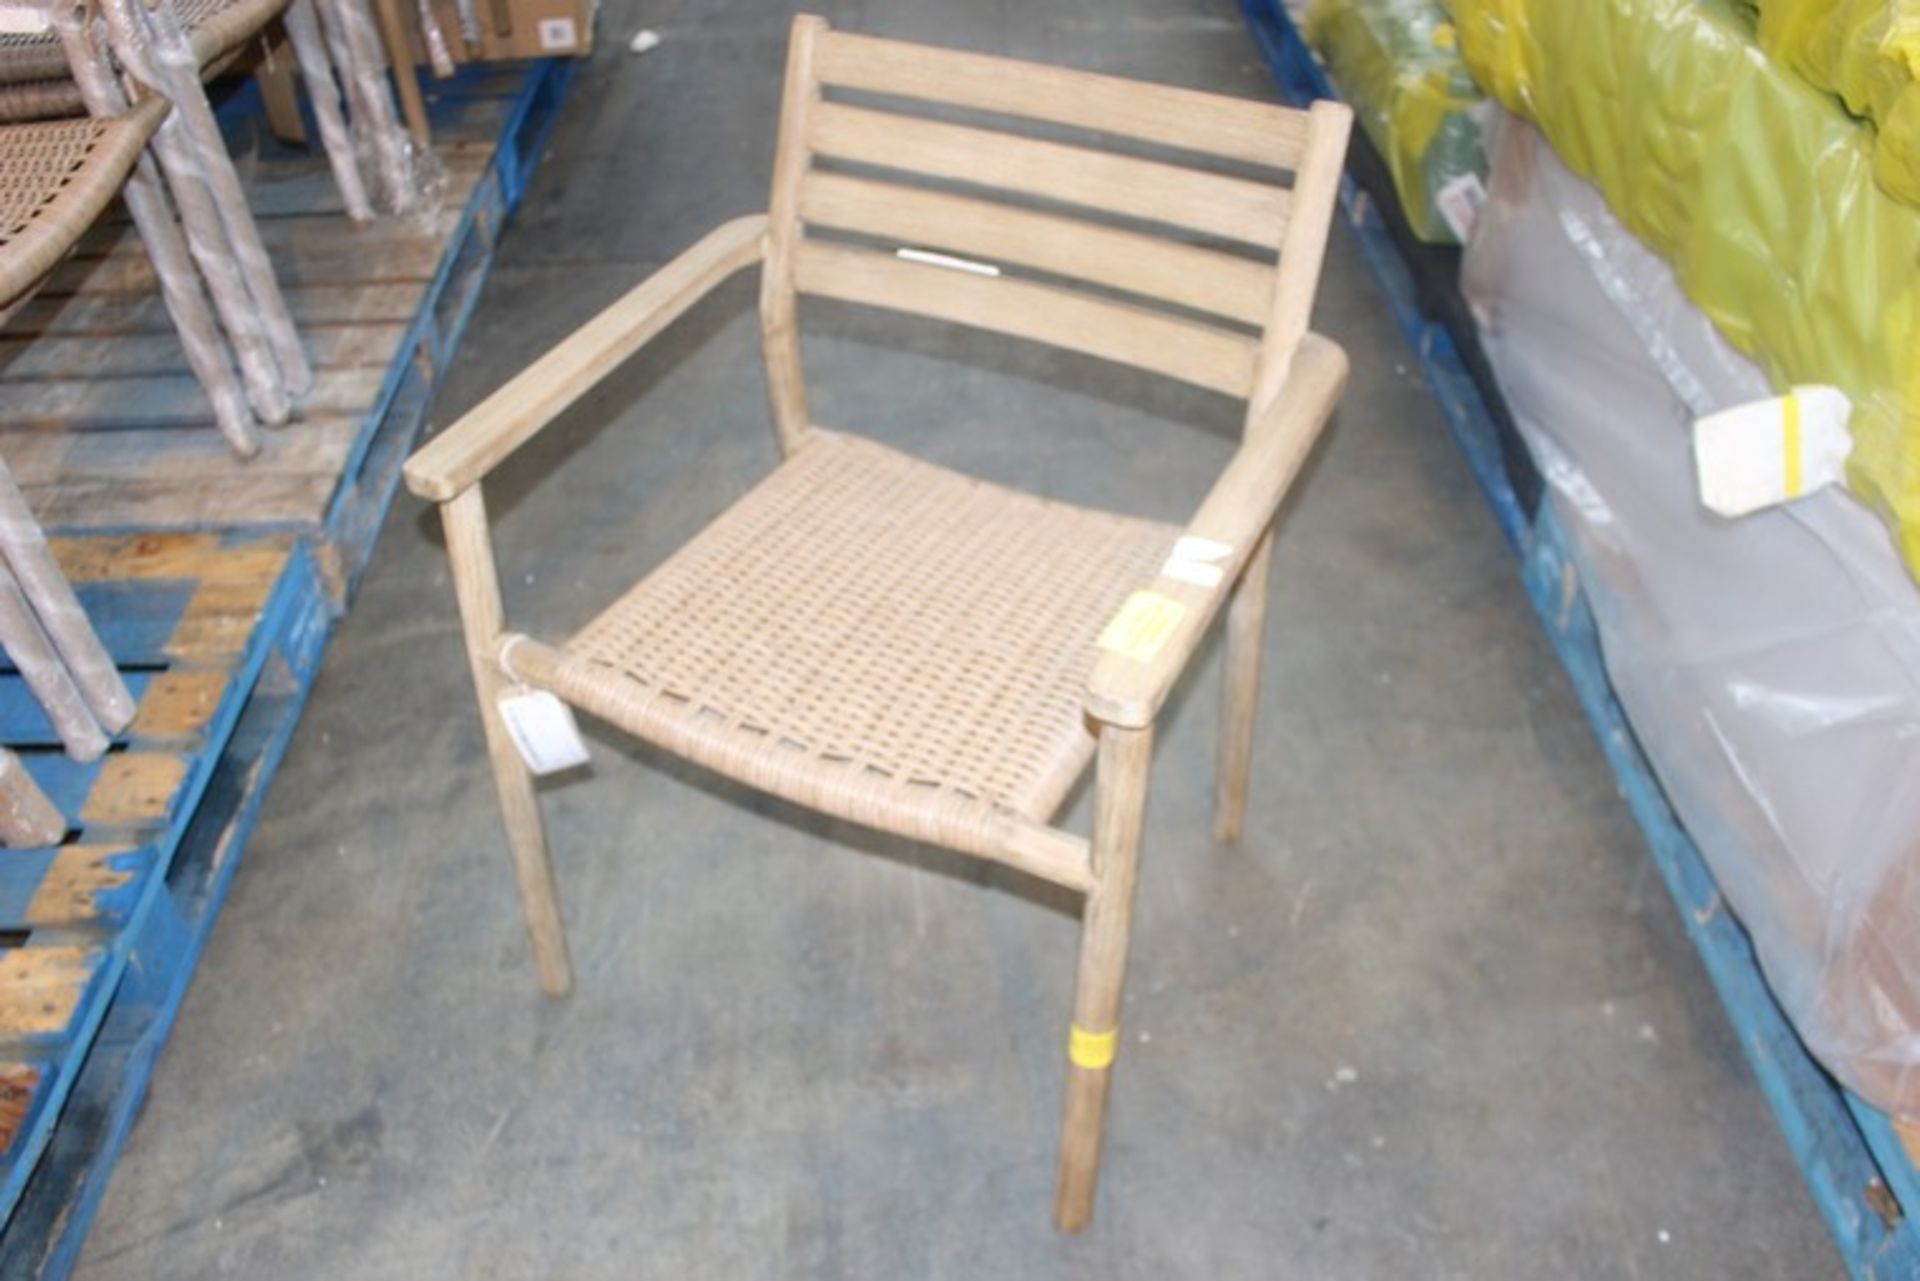 1 x ISLAY GARDEN DINING CHAIR (16.01.18) (82034602) (NO CUSHIONS) *PLEASE NOTE THAT THE BID PRICE IS